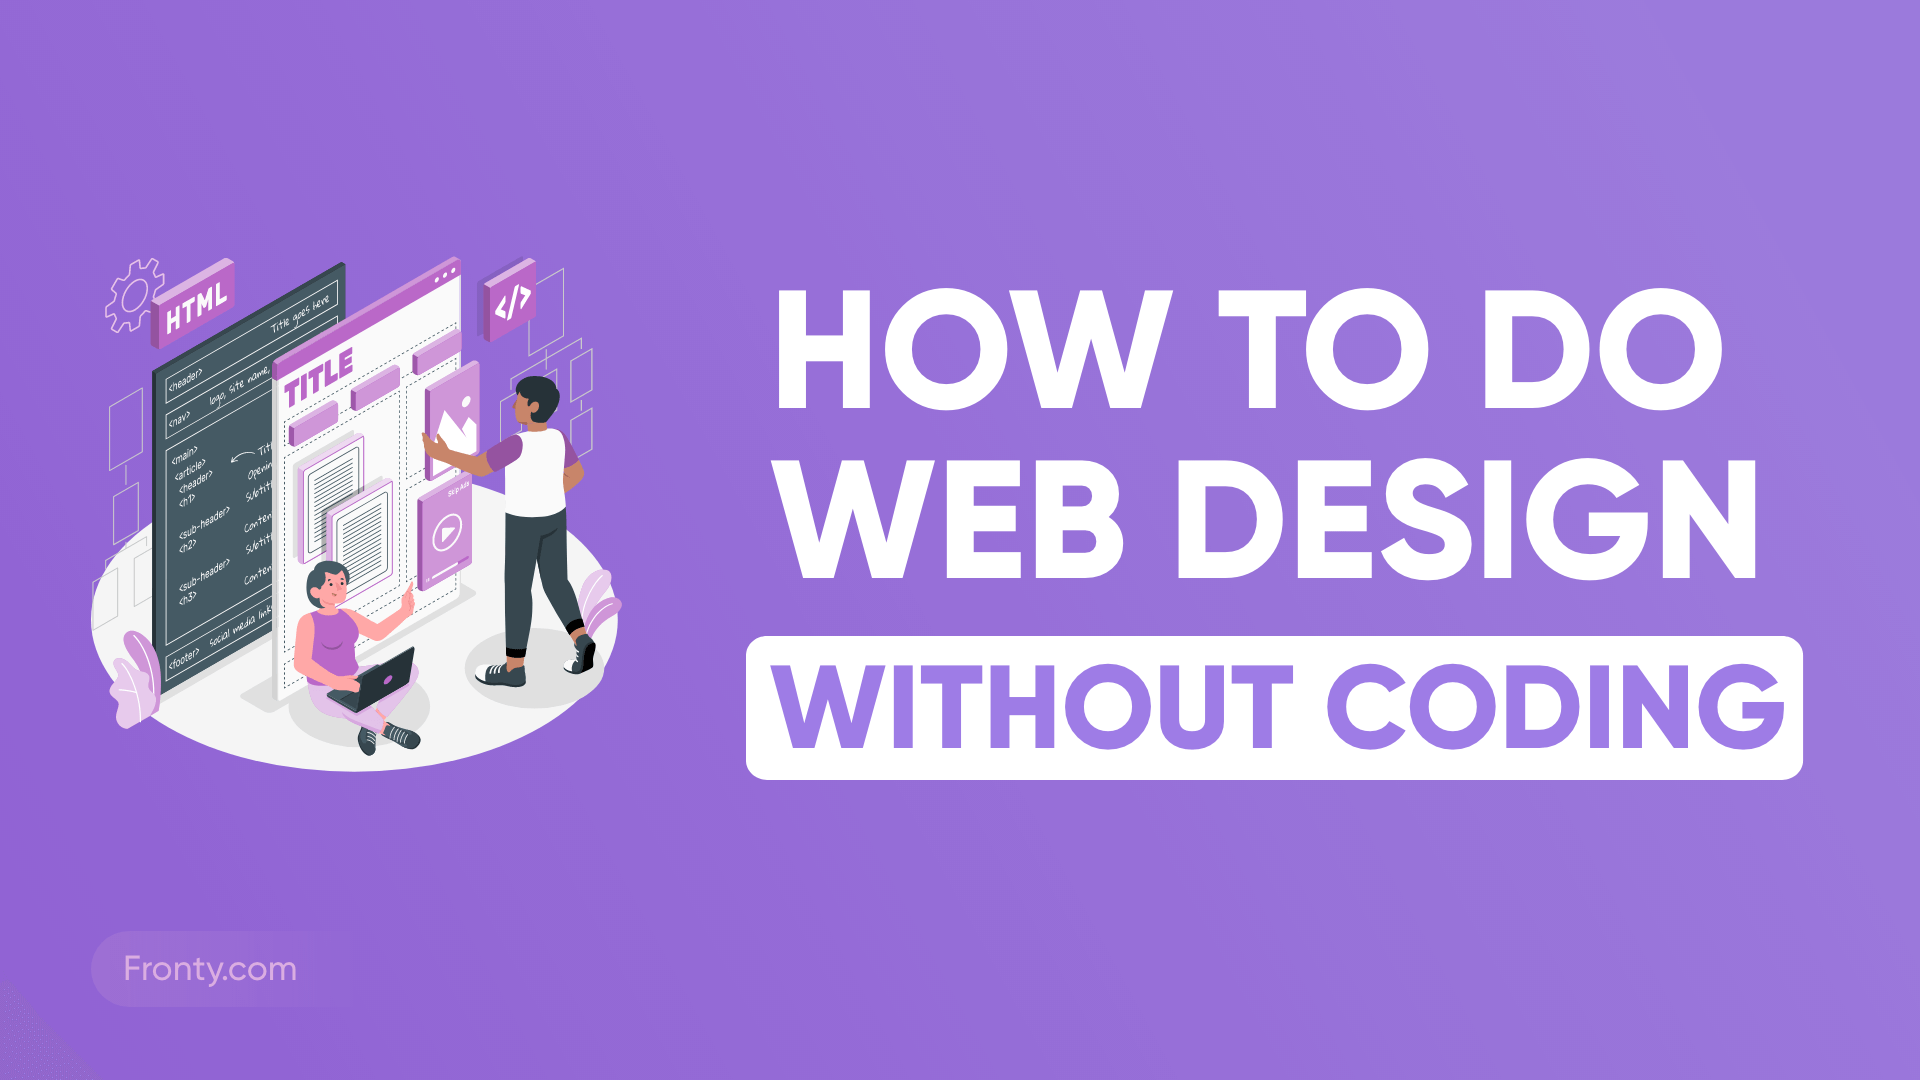 How To Create a Website Without Coding - Fronty